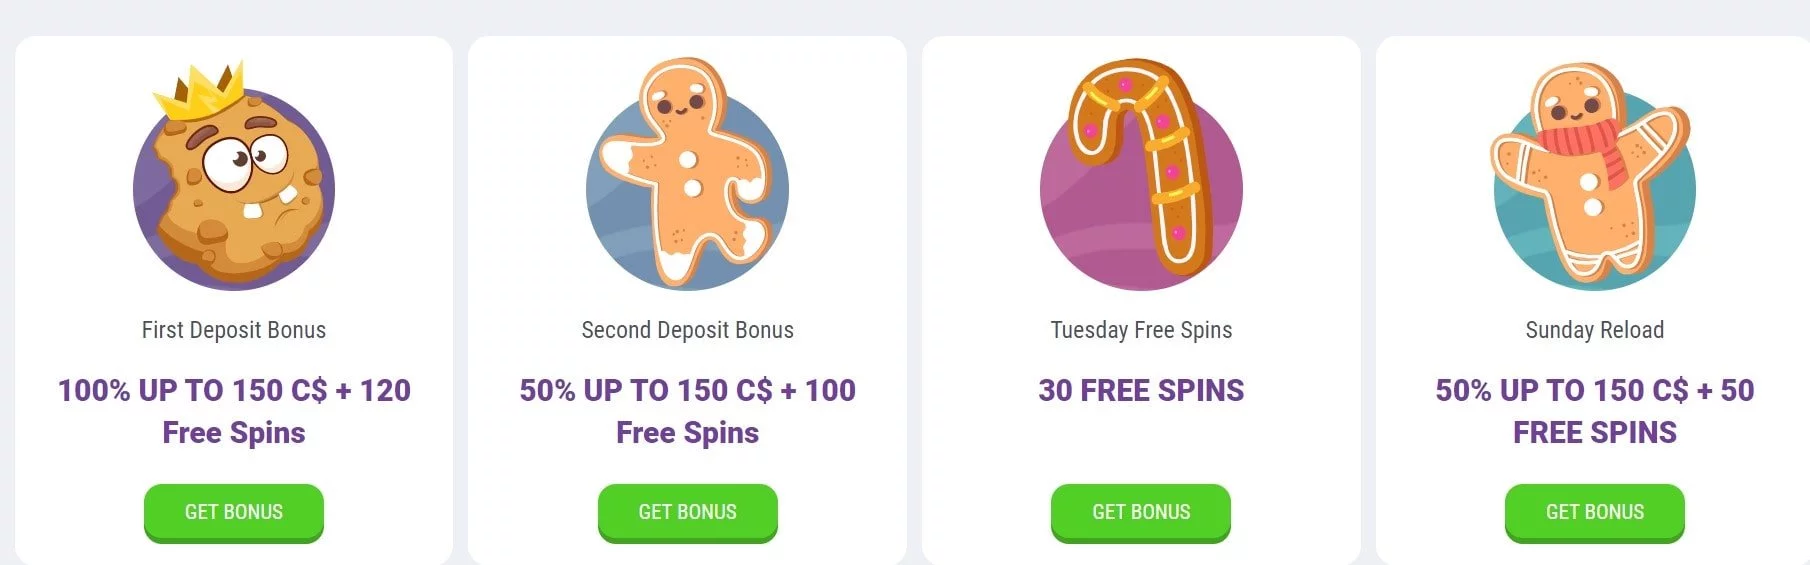 Cookie Casino promotions